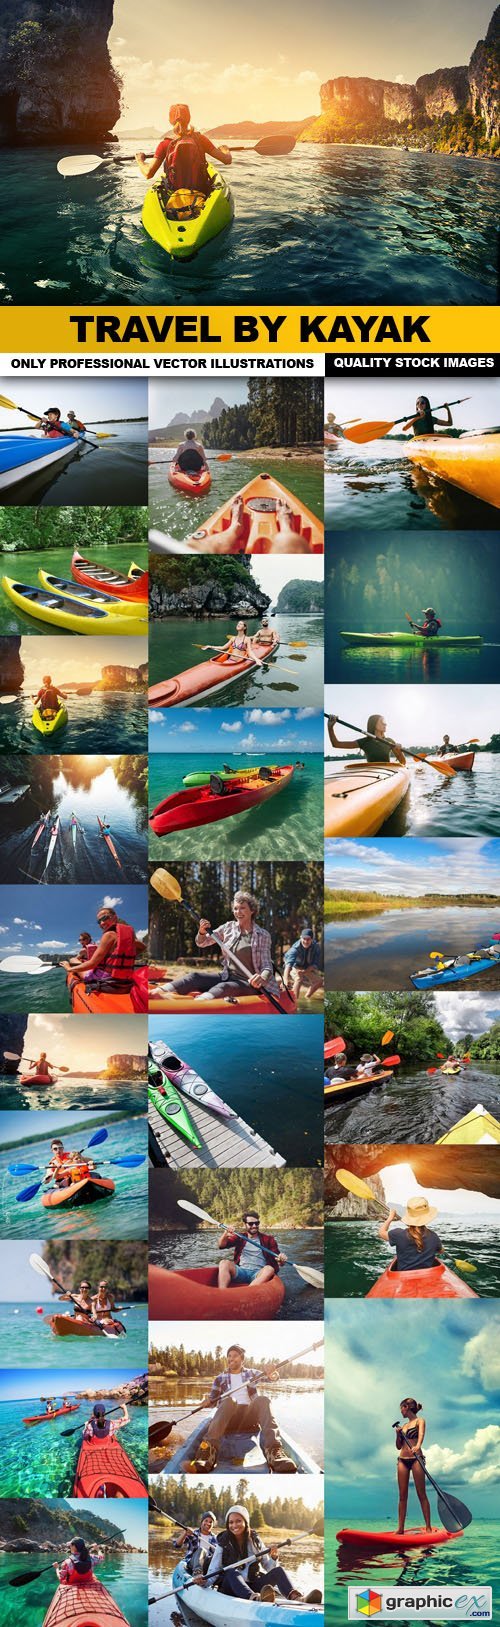 Travel By Kayak - 25 HQ Images